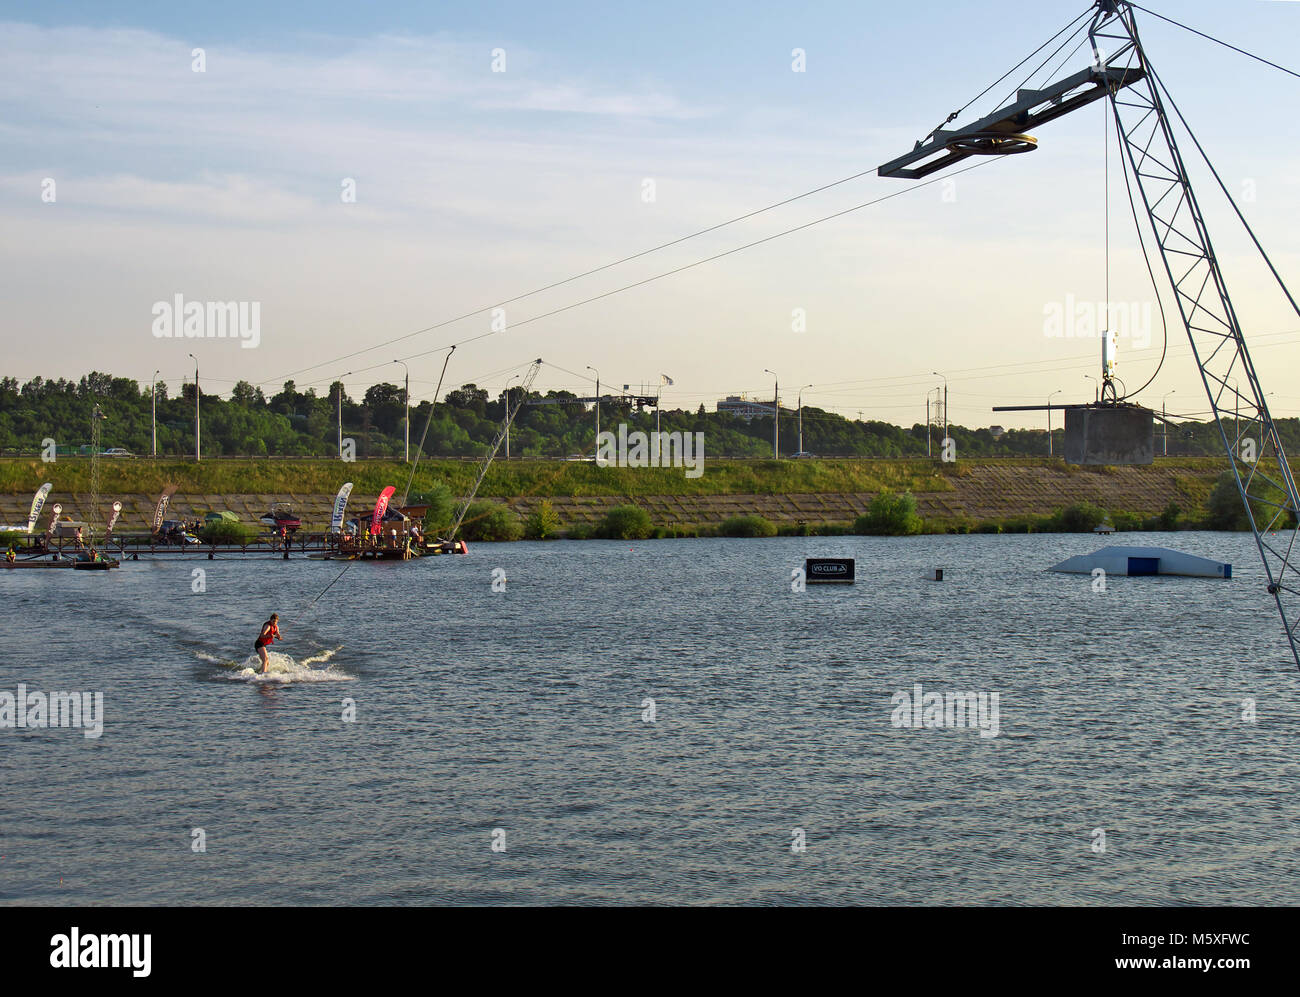 Kaluga, Russia - July 12, 2014: Fragment of river Oka in Kaluga, equipped with devices for wakeboarding Stock Photo